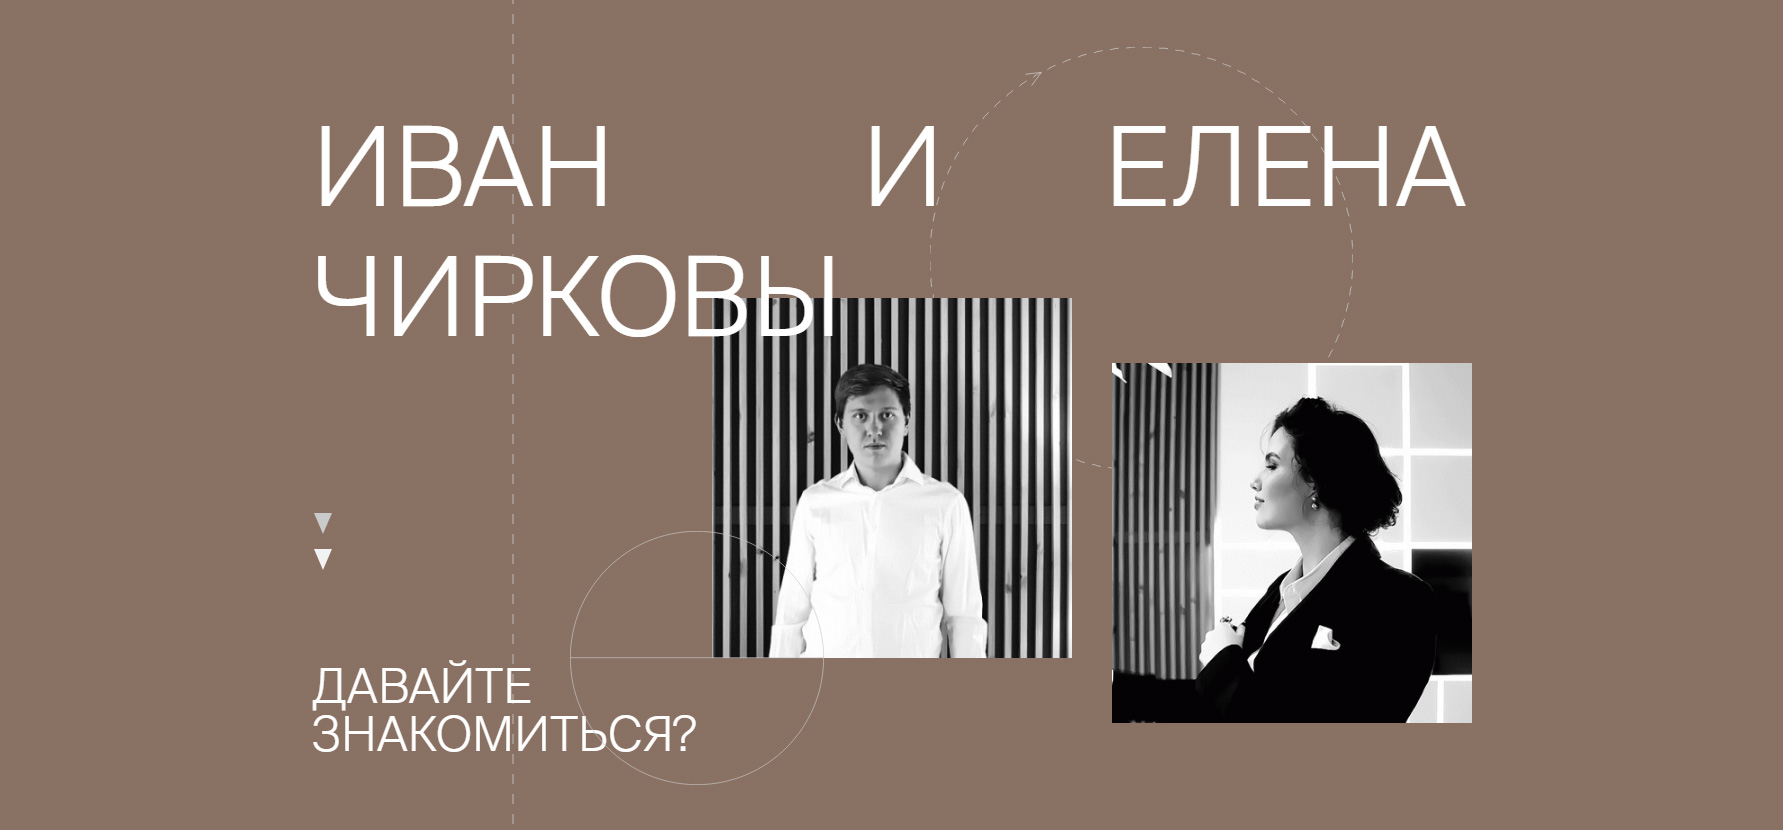 Millimetrika - Architectural design - Website of the Day